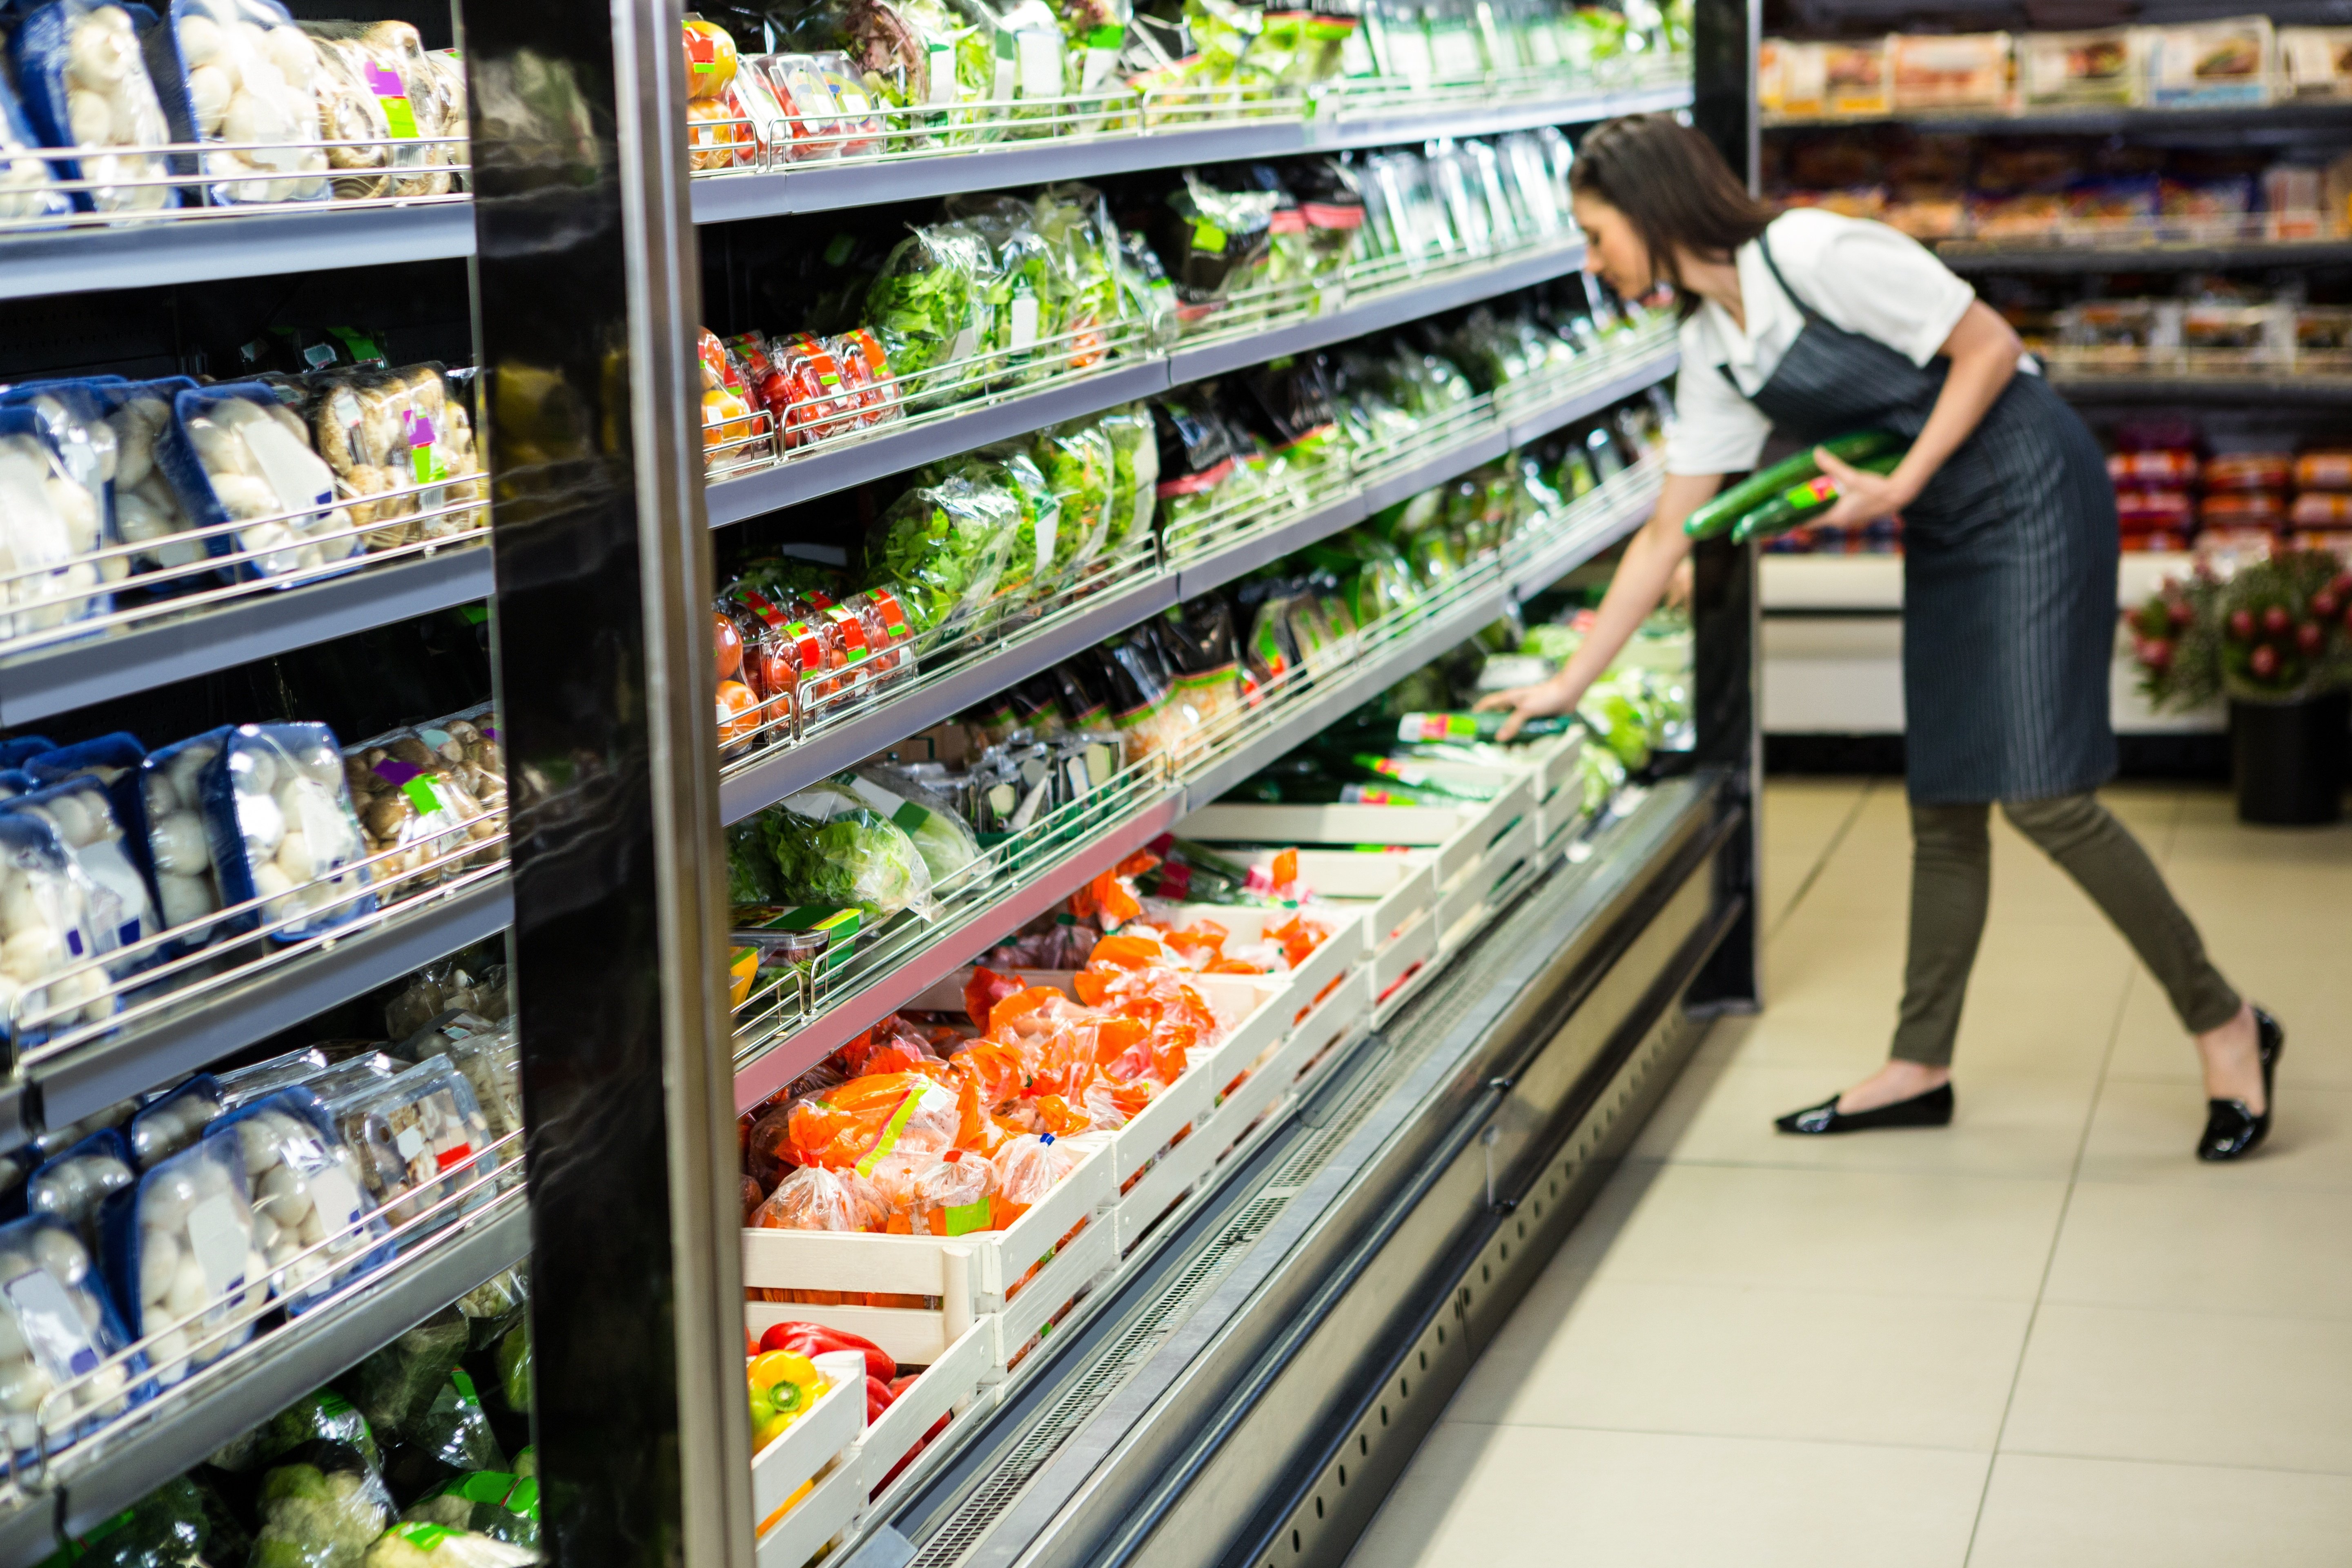 Putting actionable food waste information in the hands of staff is key to labor productivity